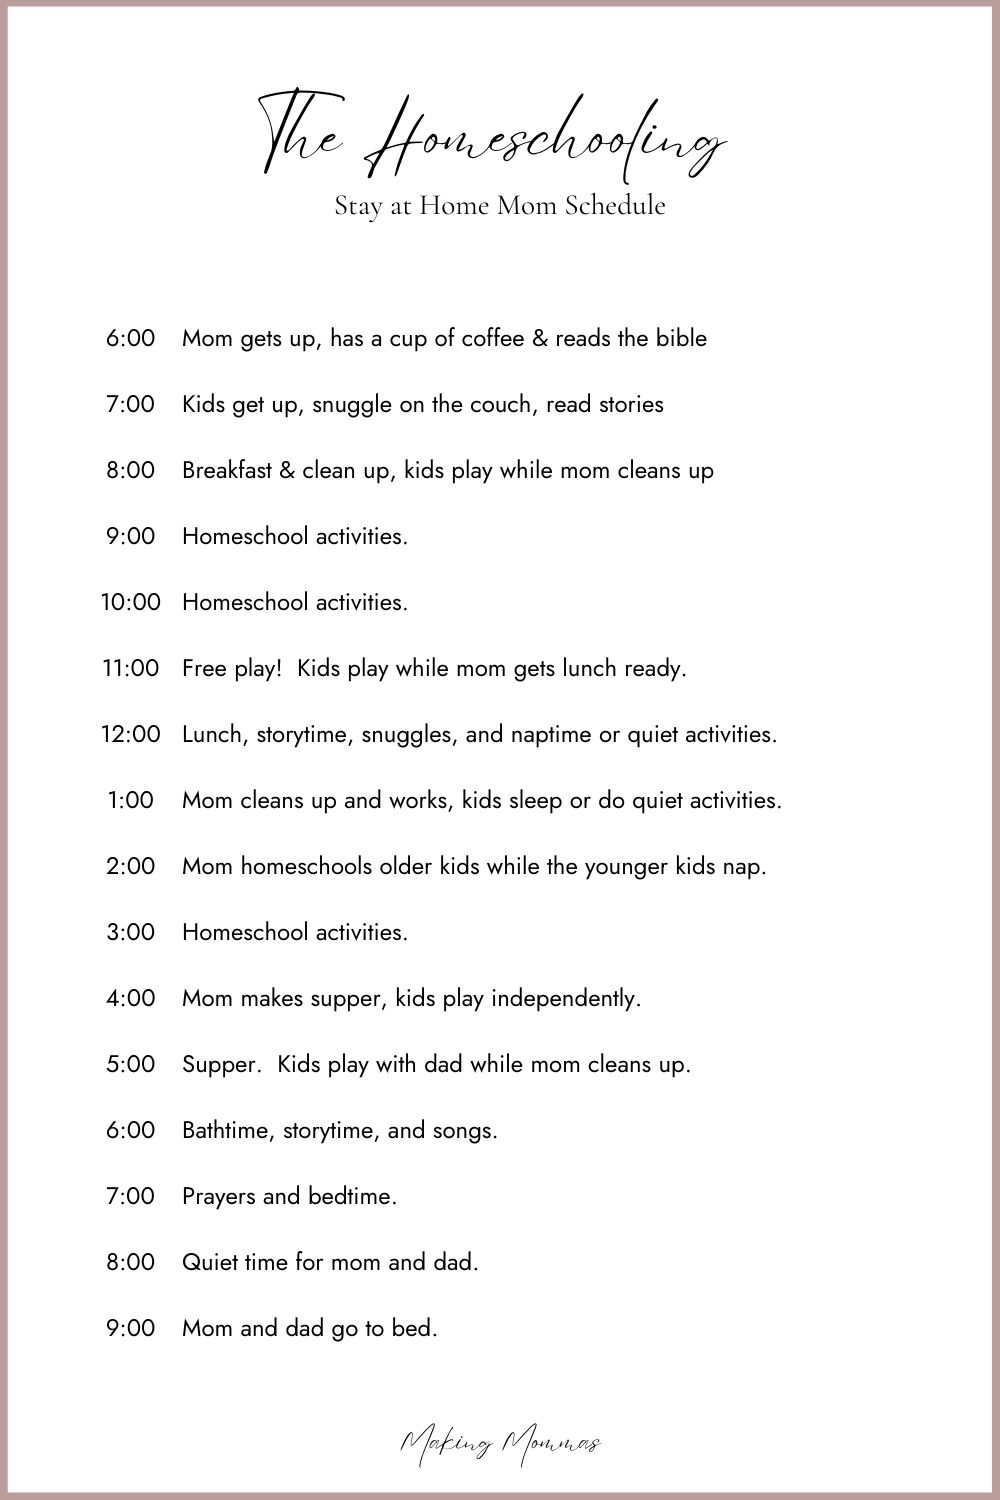 image of a stay at home mom schedule for homeschooling moms